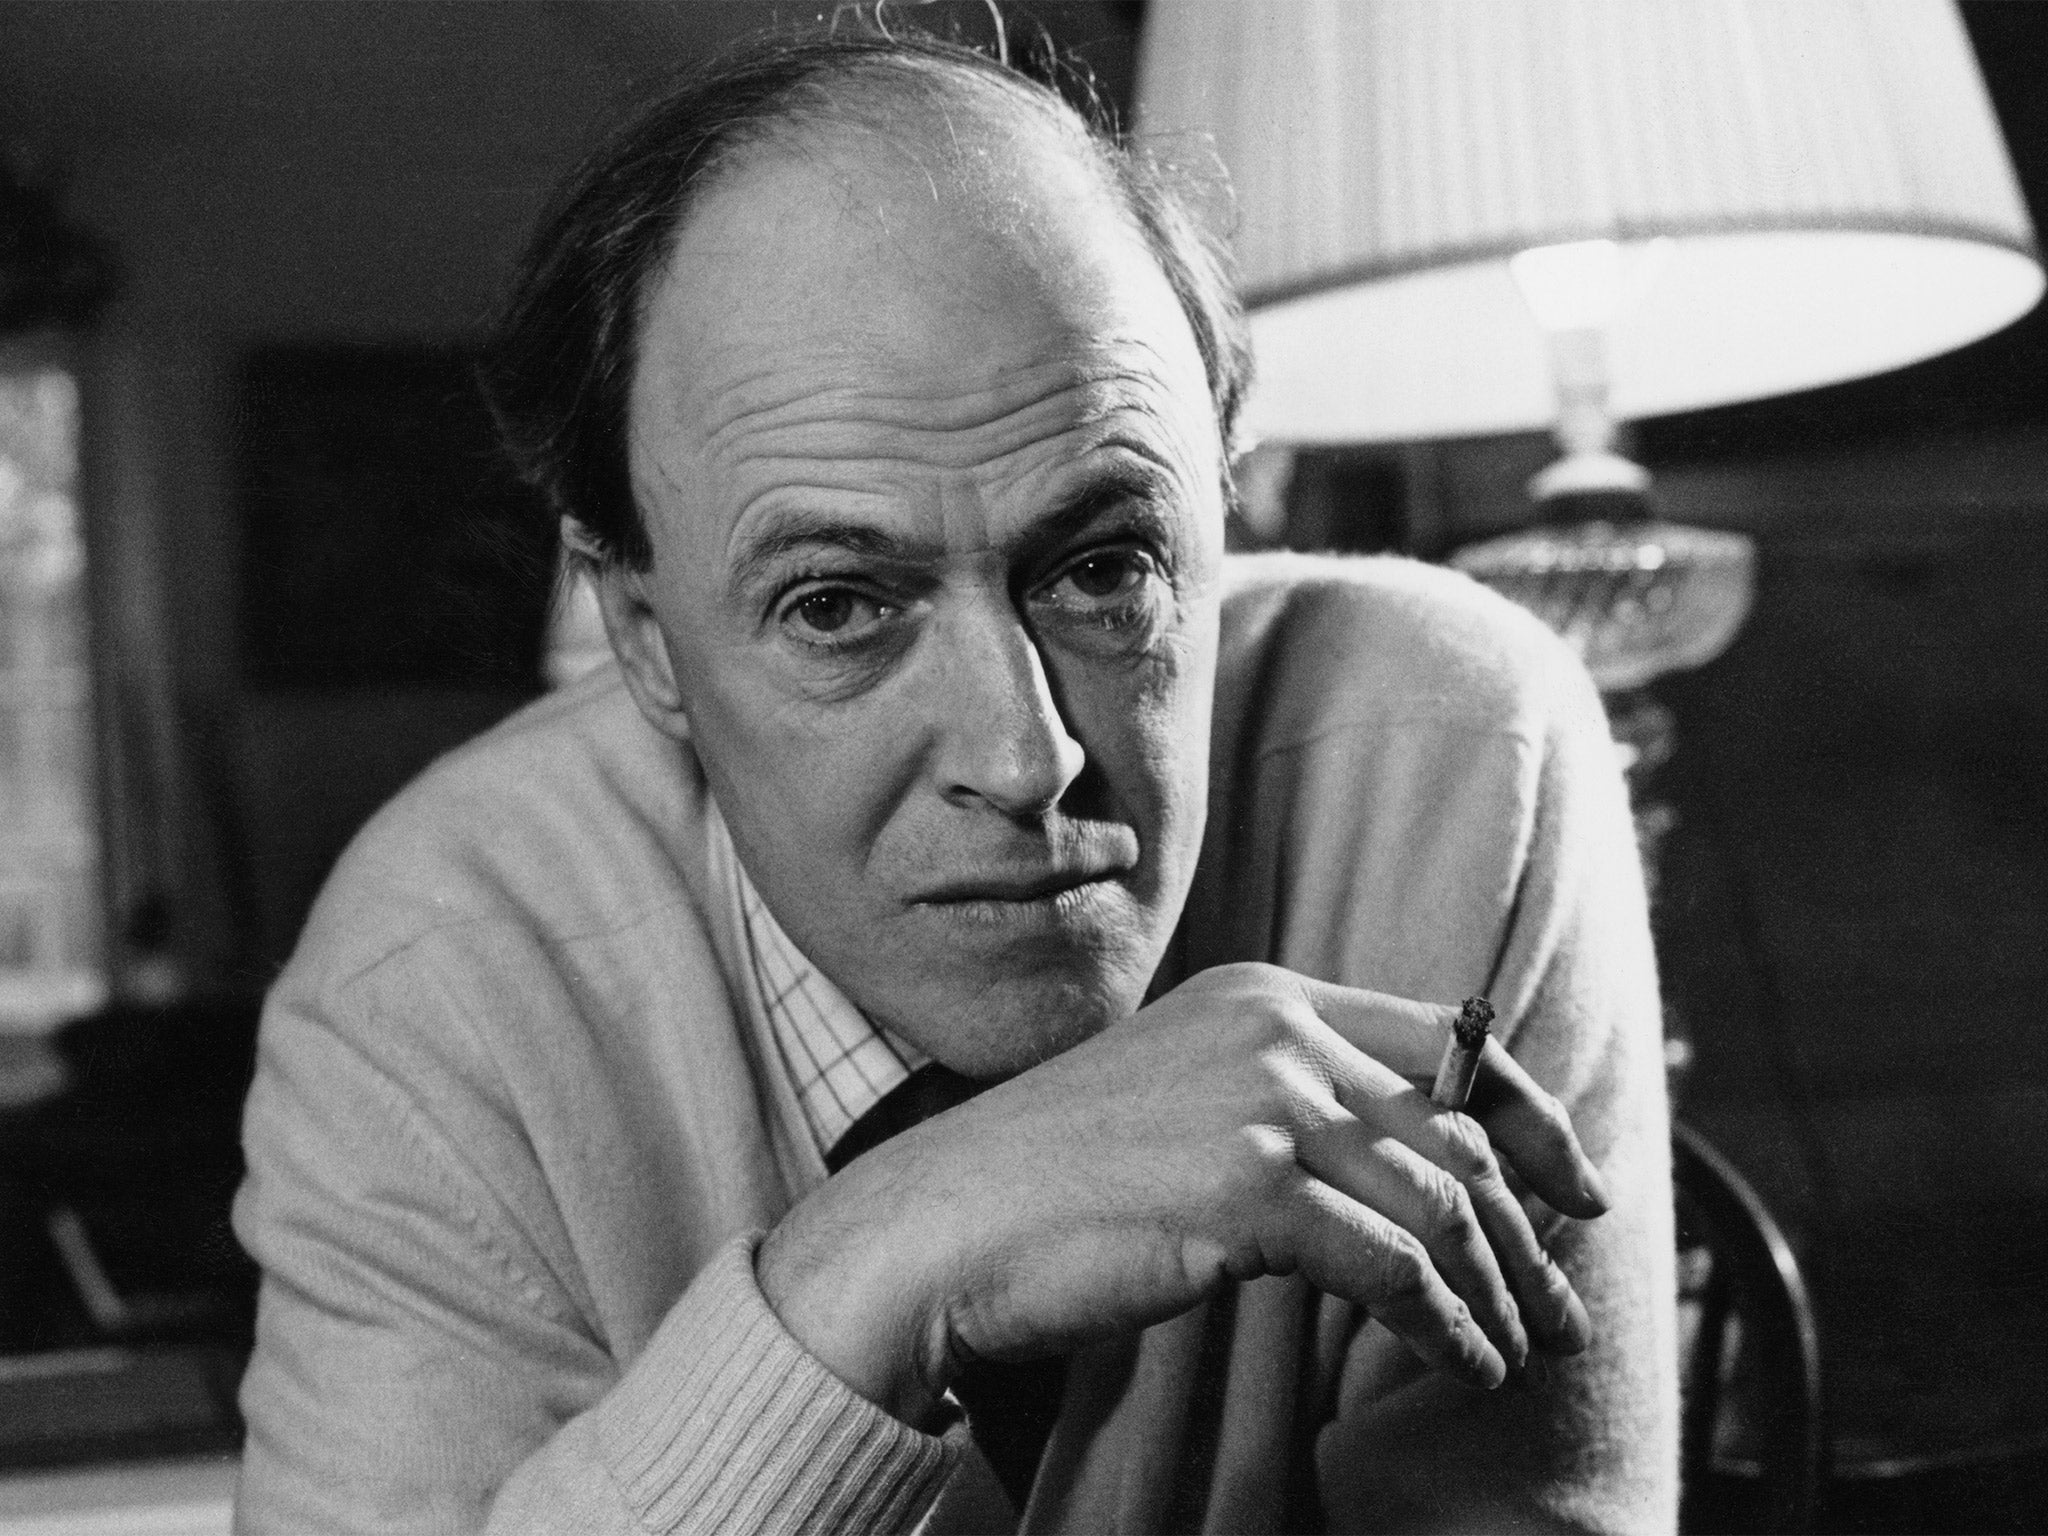 Roald Dahl, author of 'Charlie and the Chocolate Factory', pictured in 1971